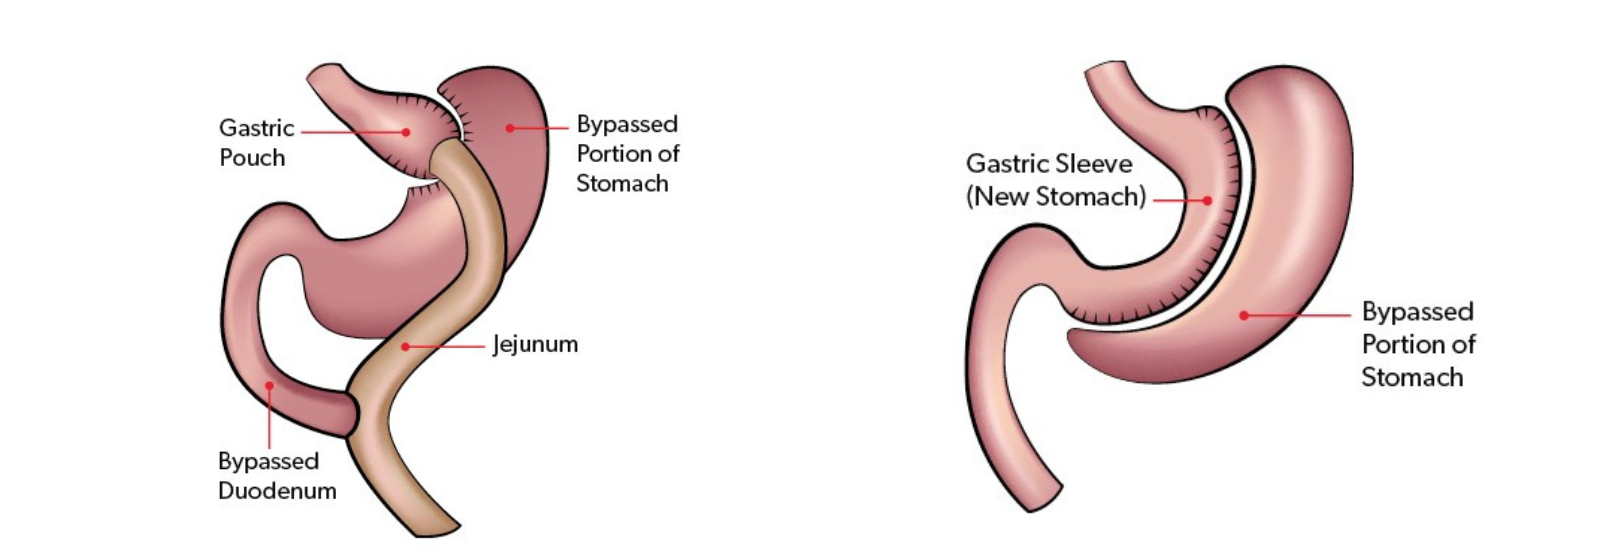 Gastric bypass surgery and gastric sleeve surgery graphics.